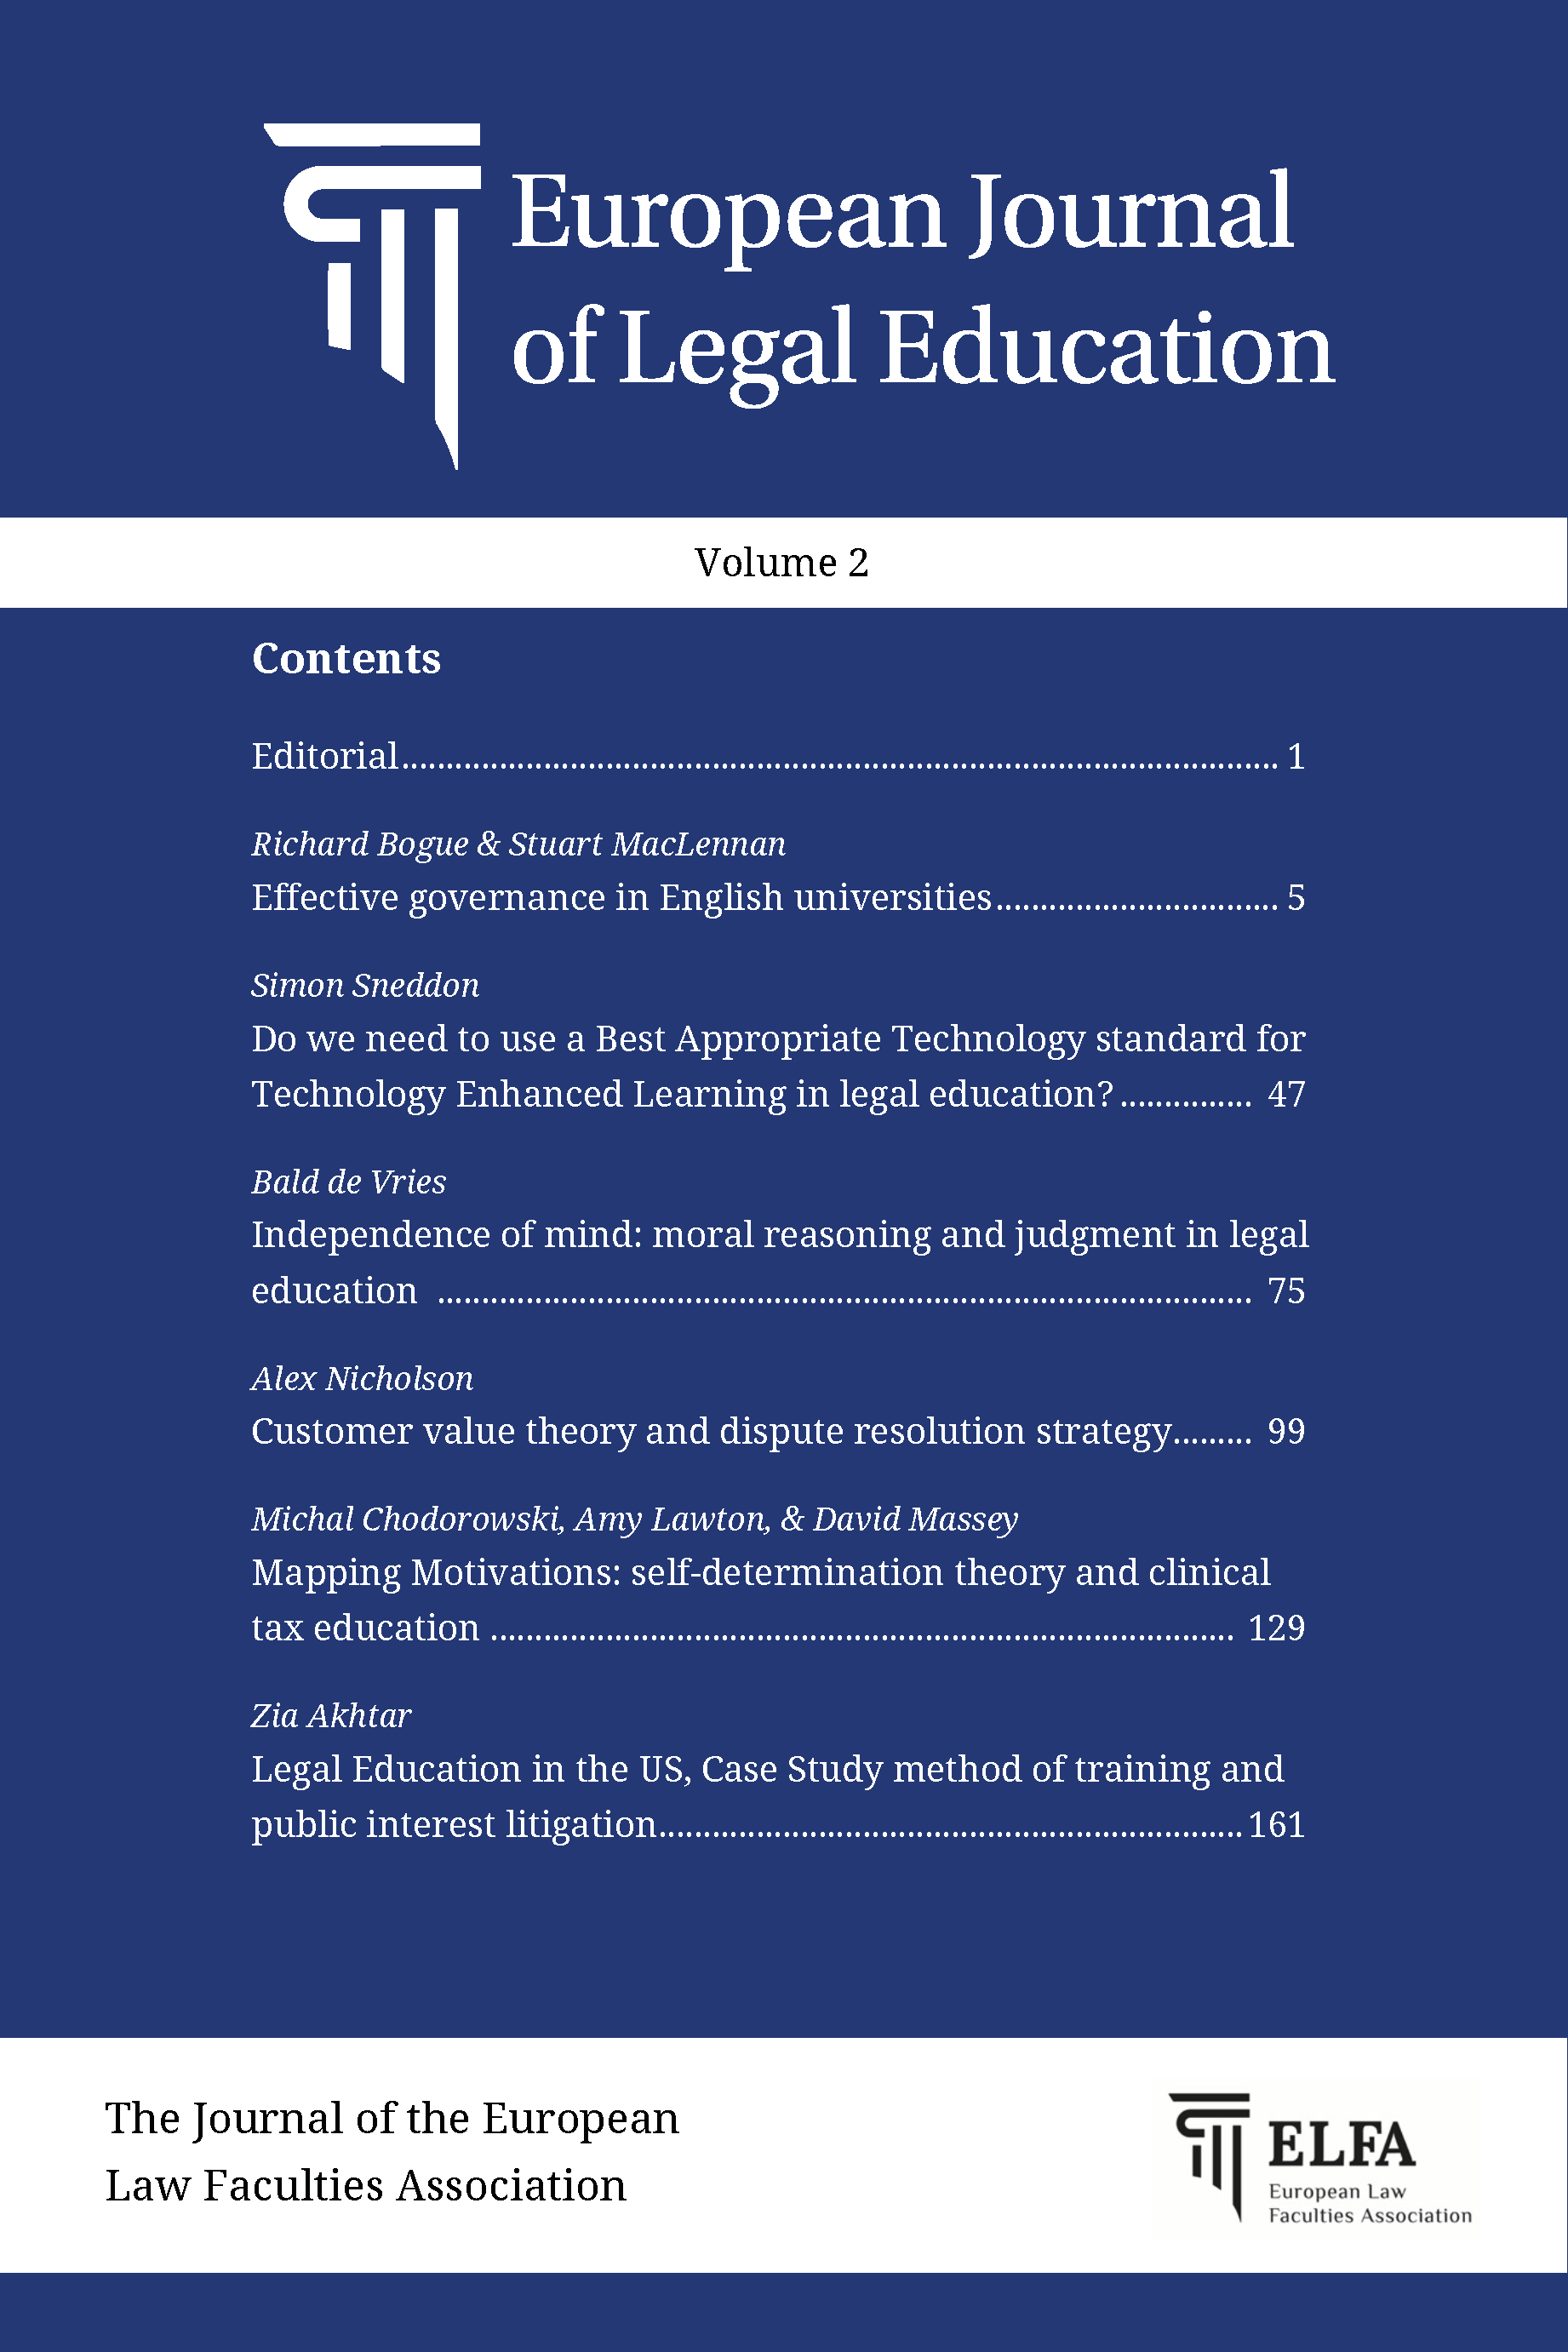 Cover of the European Journal of Legal Education